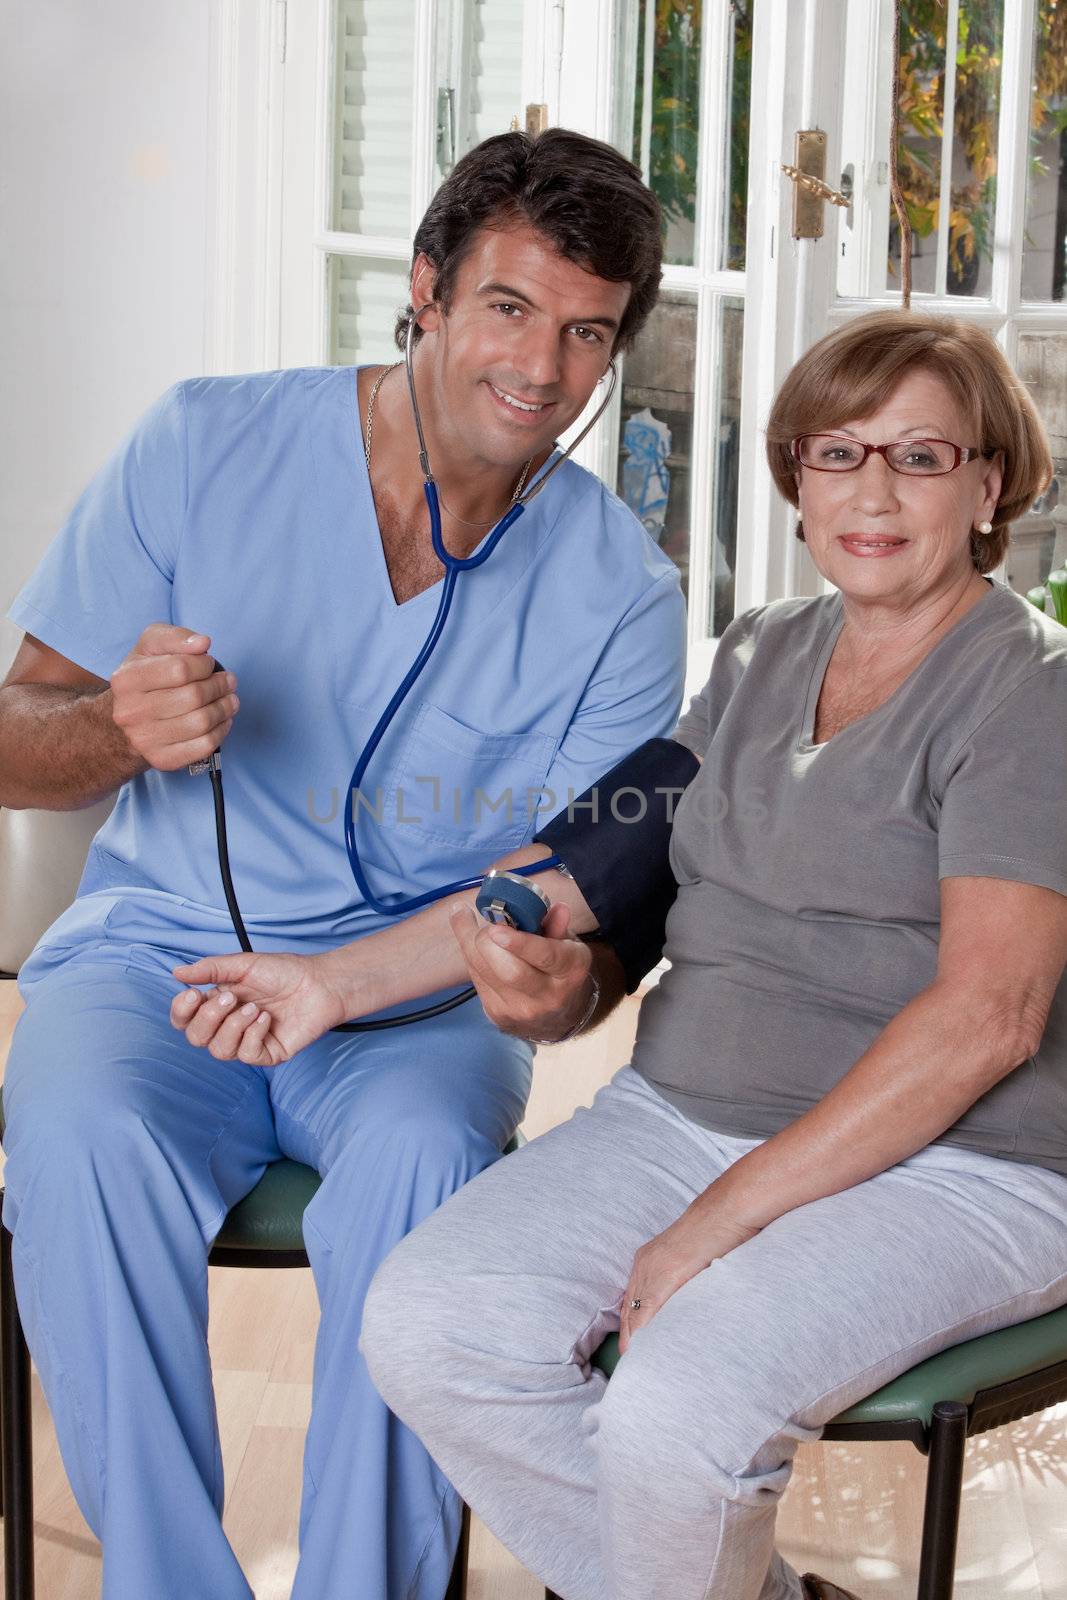 Doctor taking the blood pressure of a patient.